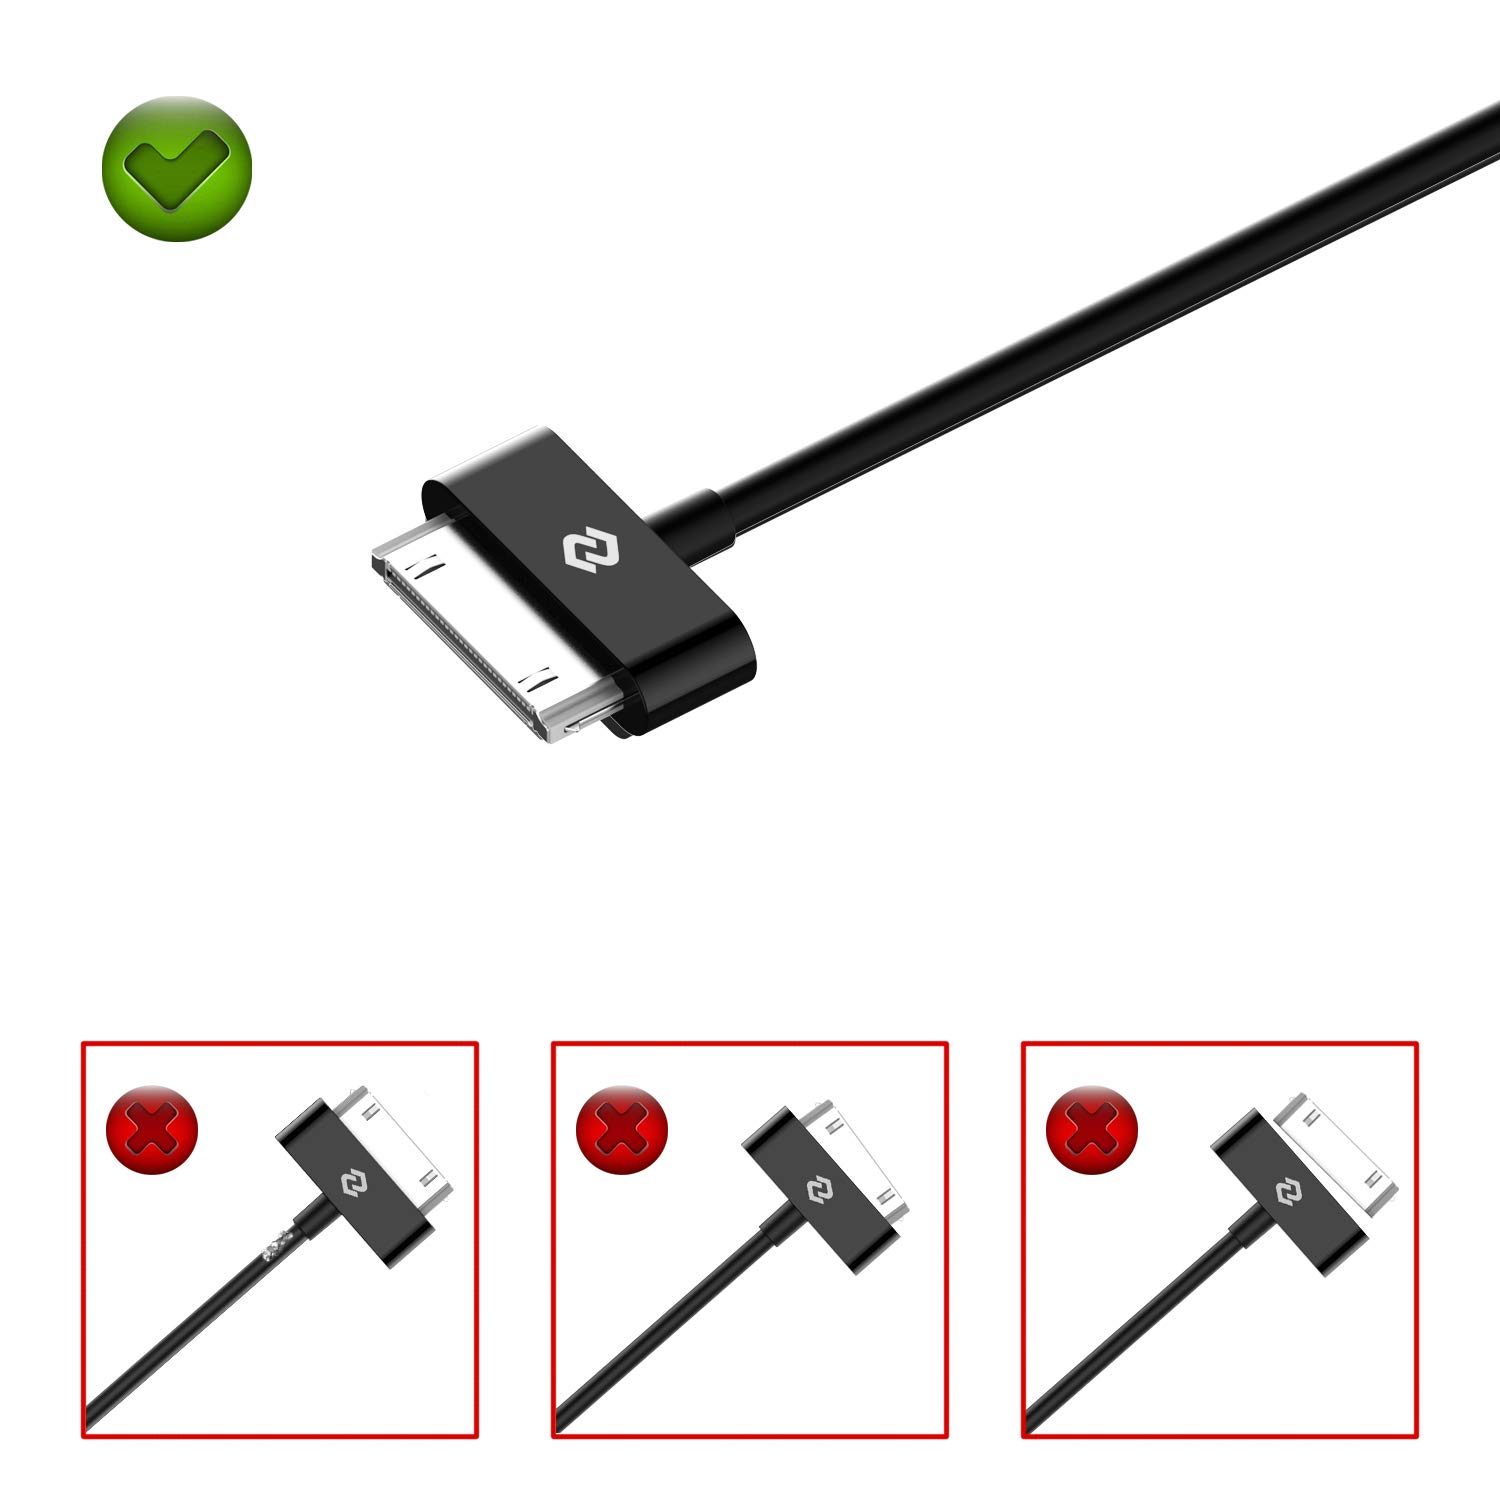 JETech USB Sync and Charging Cable Compatible iPhone 4/4s, iPhone 3G/3GS, iPad 1/2/3, iPod, 3.3 Feet (Black)